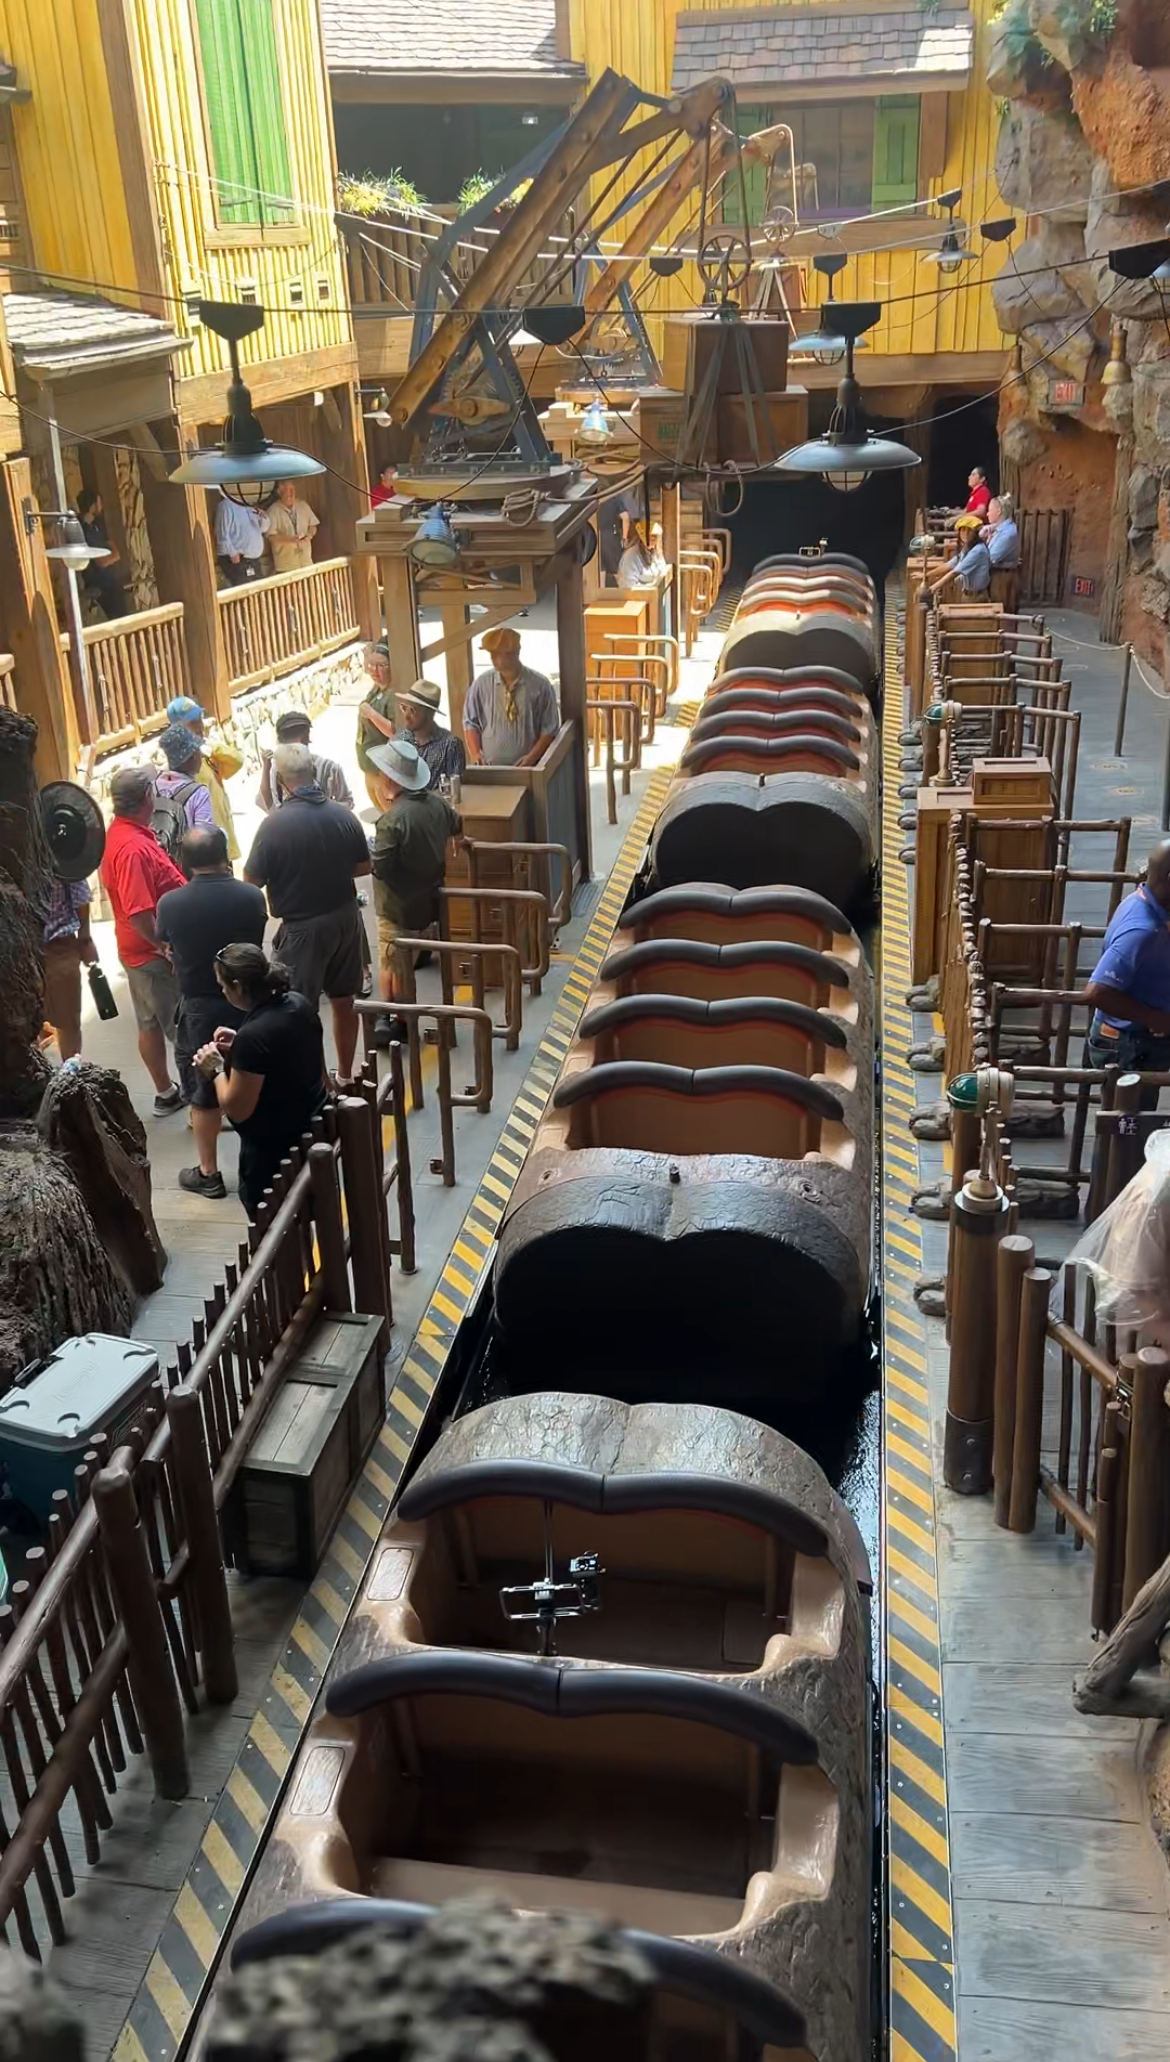 People are boarding a roller coaster ride at an amusement park. The setting has a rugged, Western theme with wooden structures and a mountain backdrop